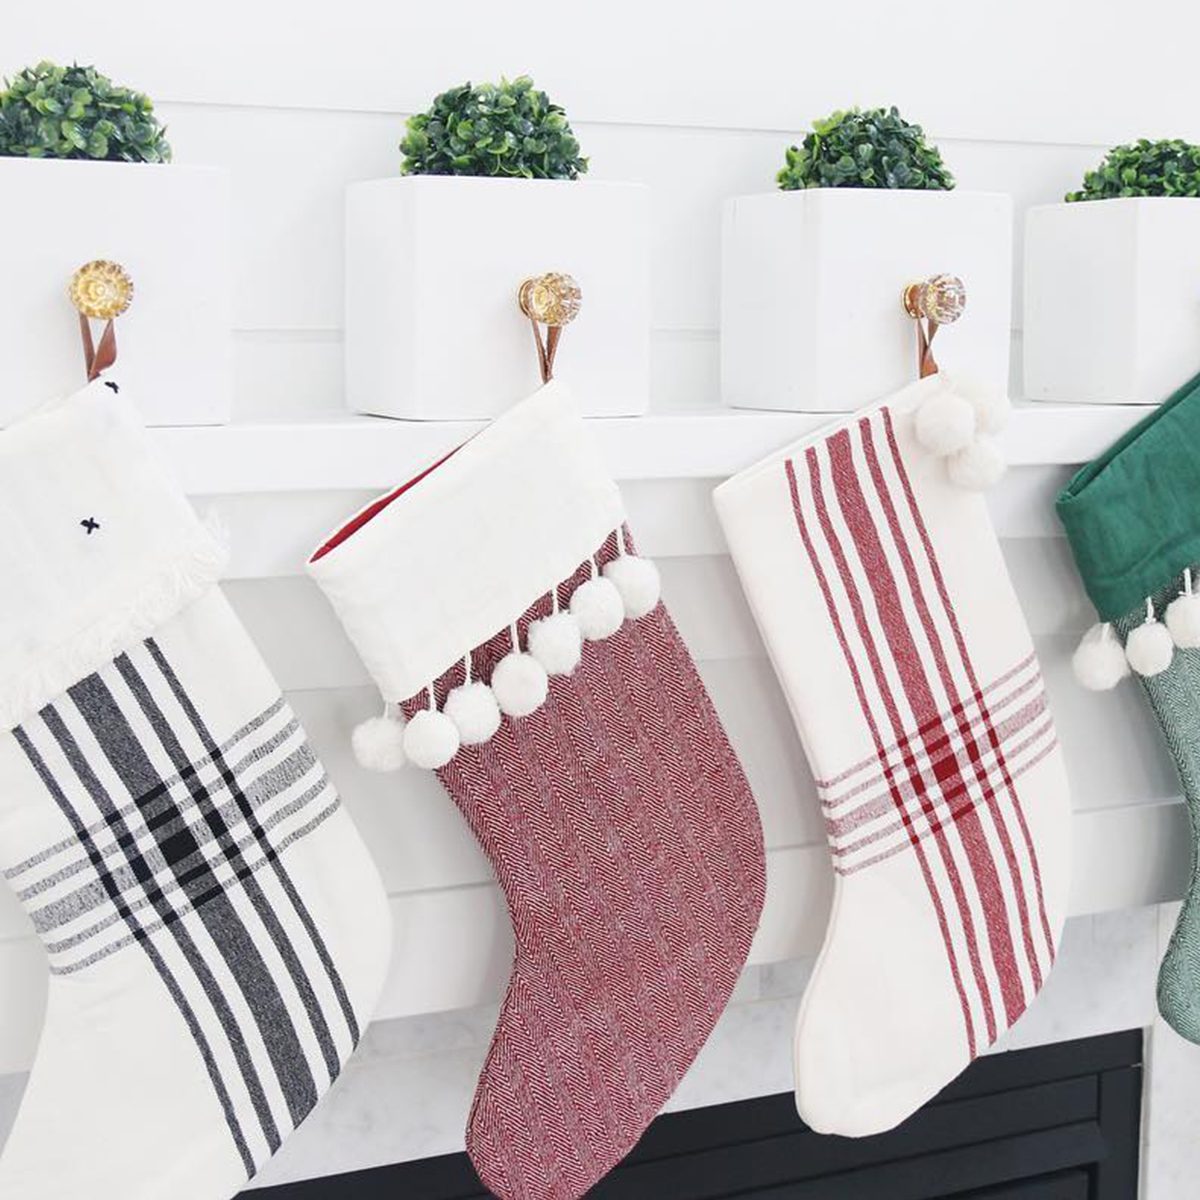 10 Unique Ways To Hang Christmas Stockings | The Family Handyman